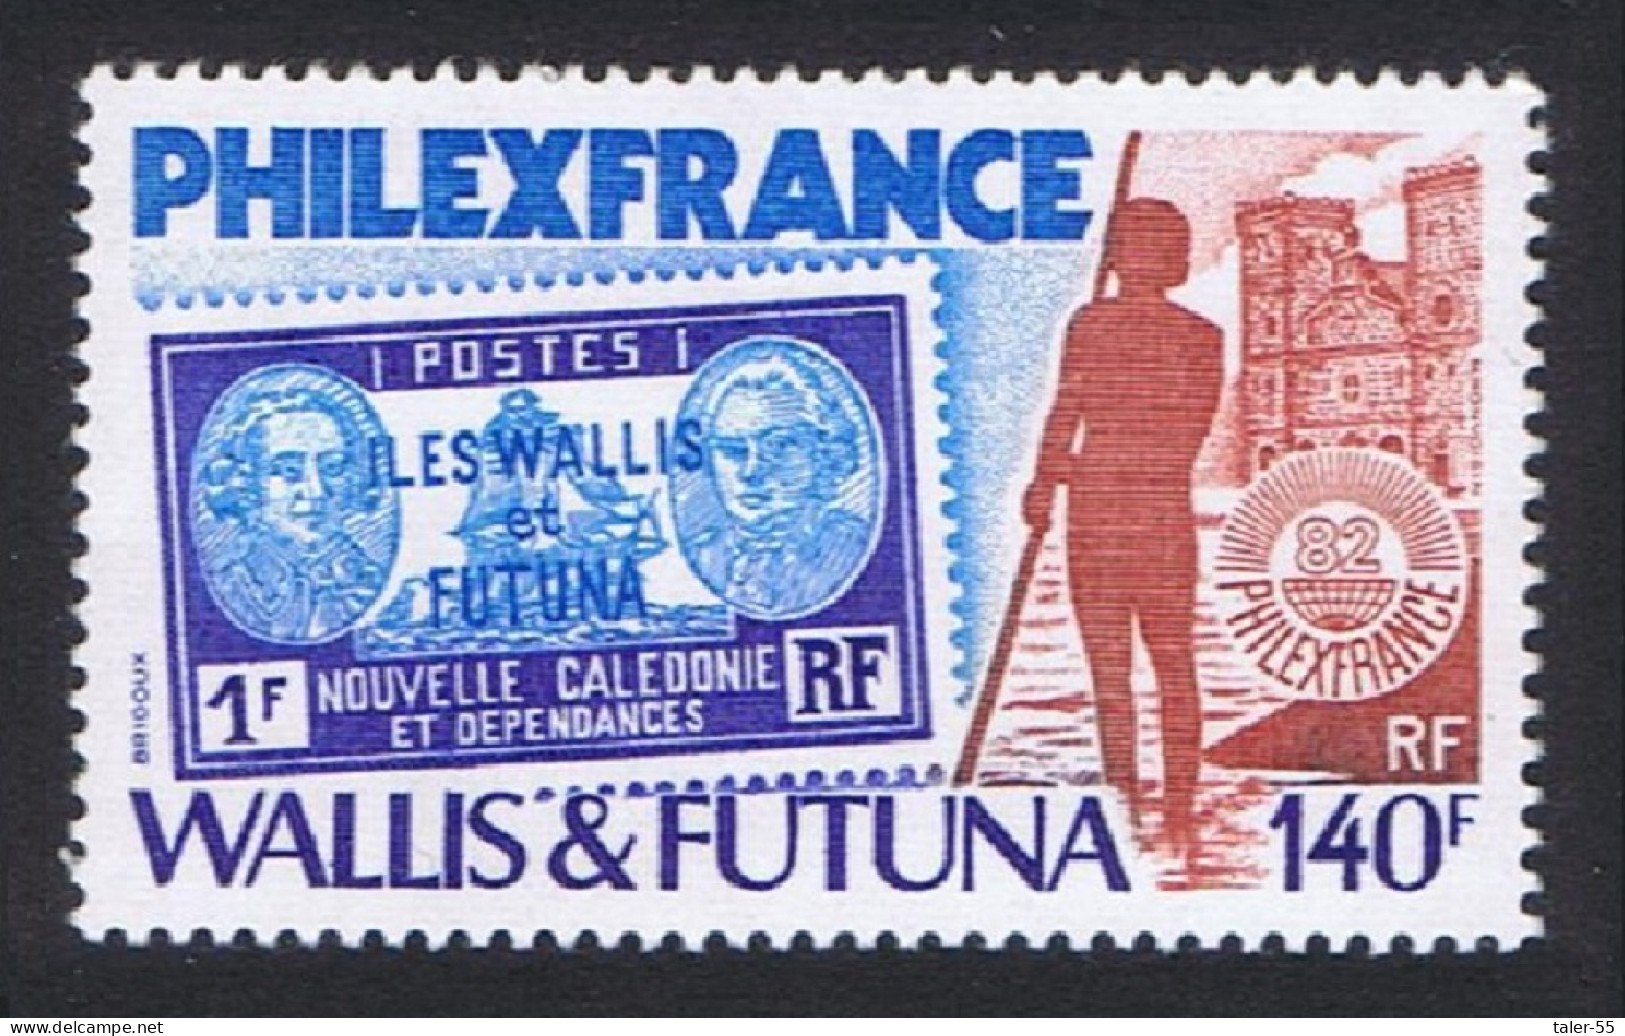 Wallis And Futuna 'Philexfrance 82' Stamp Exhibition 1982 MNH SG#395 Sc#282 - Unused Stamps